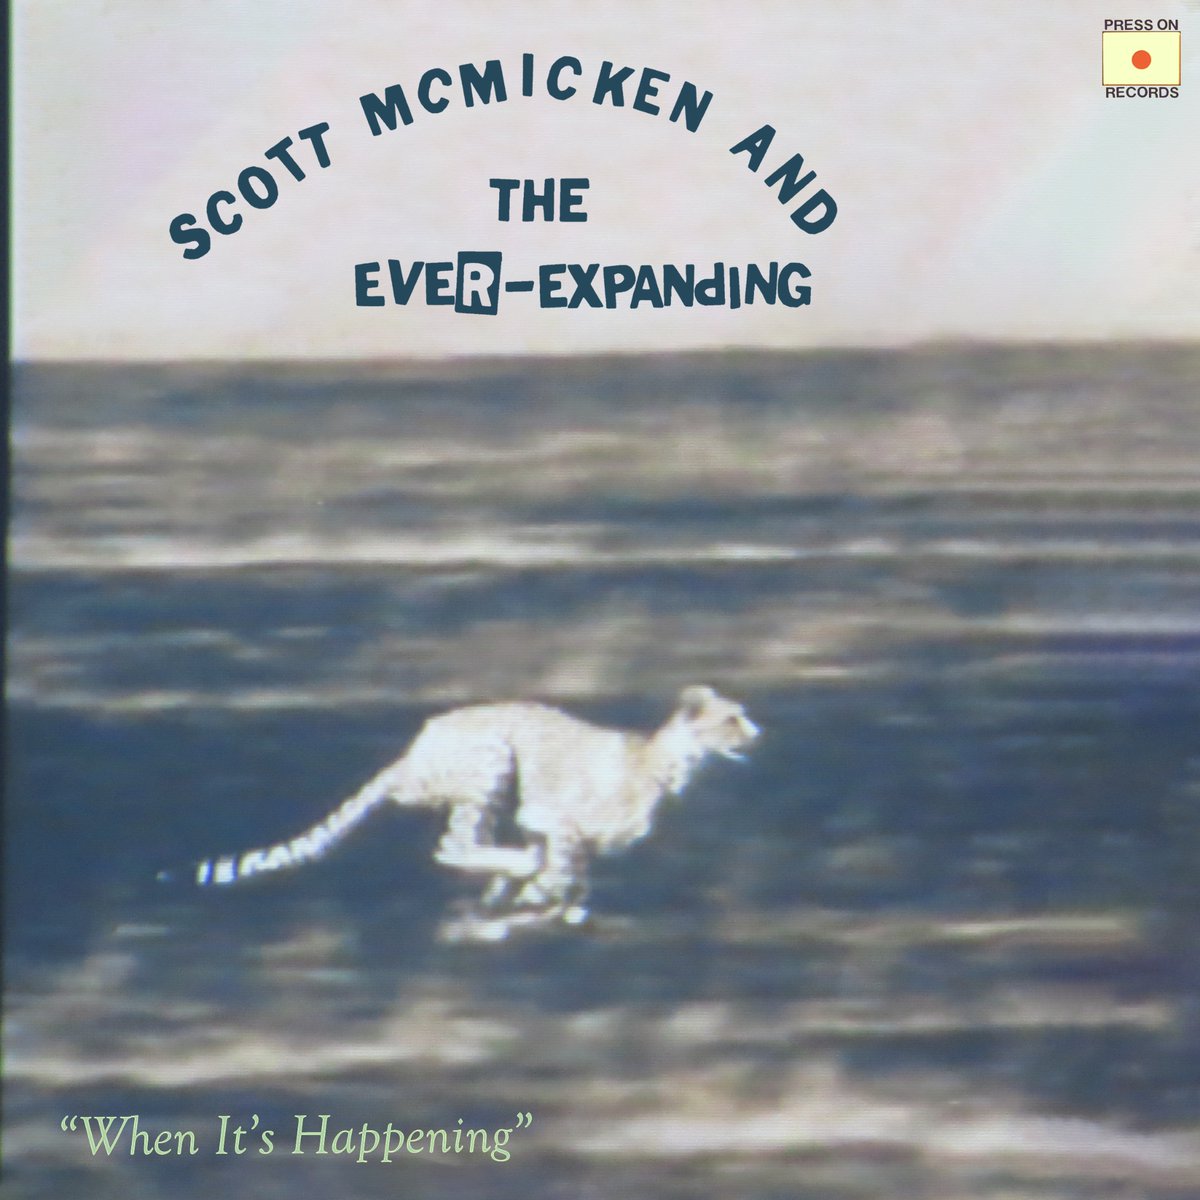 New album “When It’s Happening” is out now! PRE ORDER vinyl & cassettes at pressonrecords.com